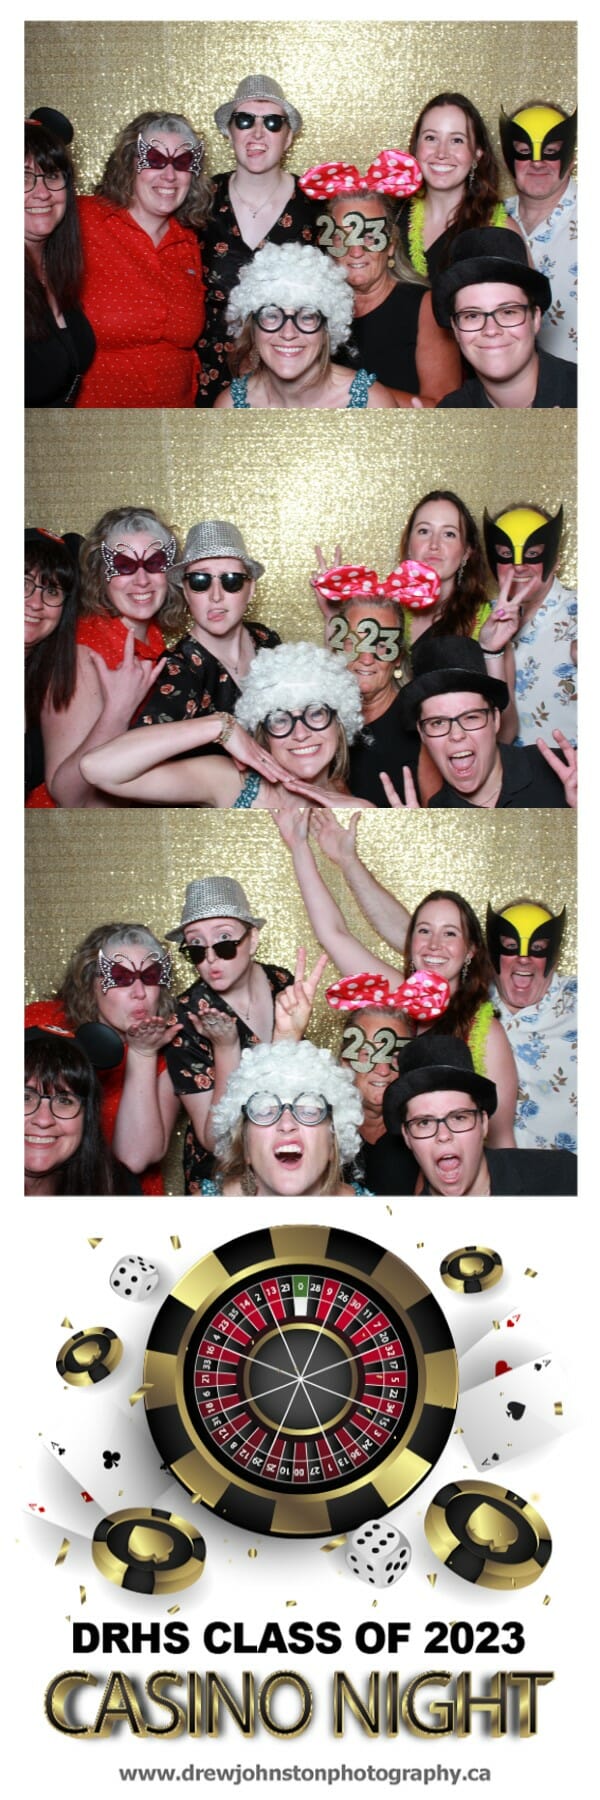 DRHS Prom Booth photostrip of a large group of students